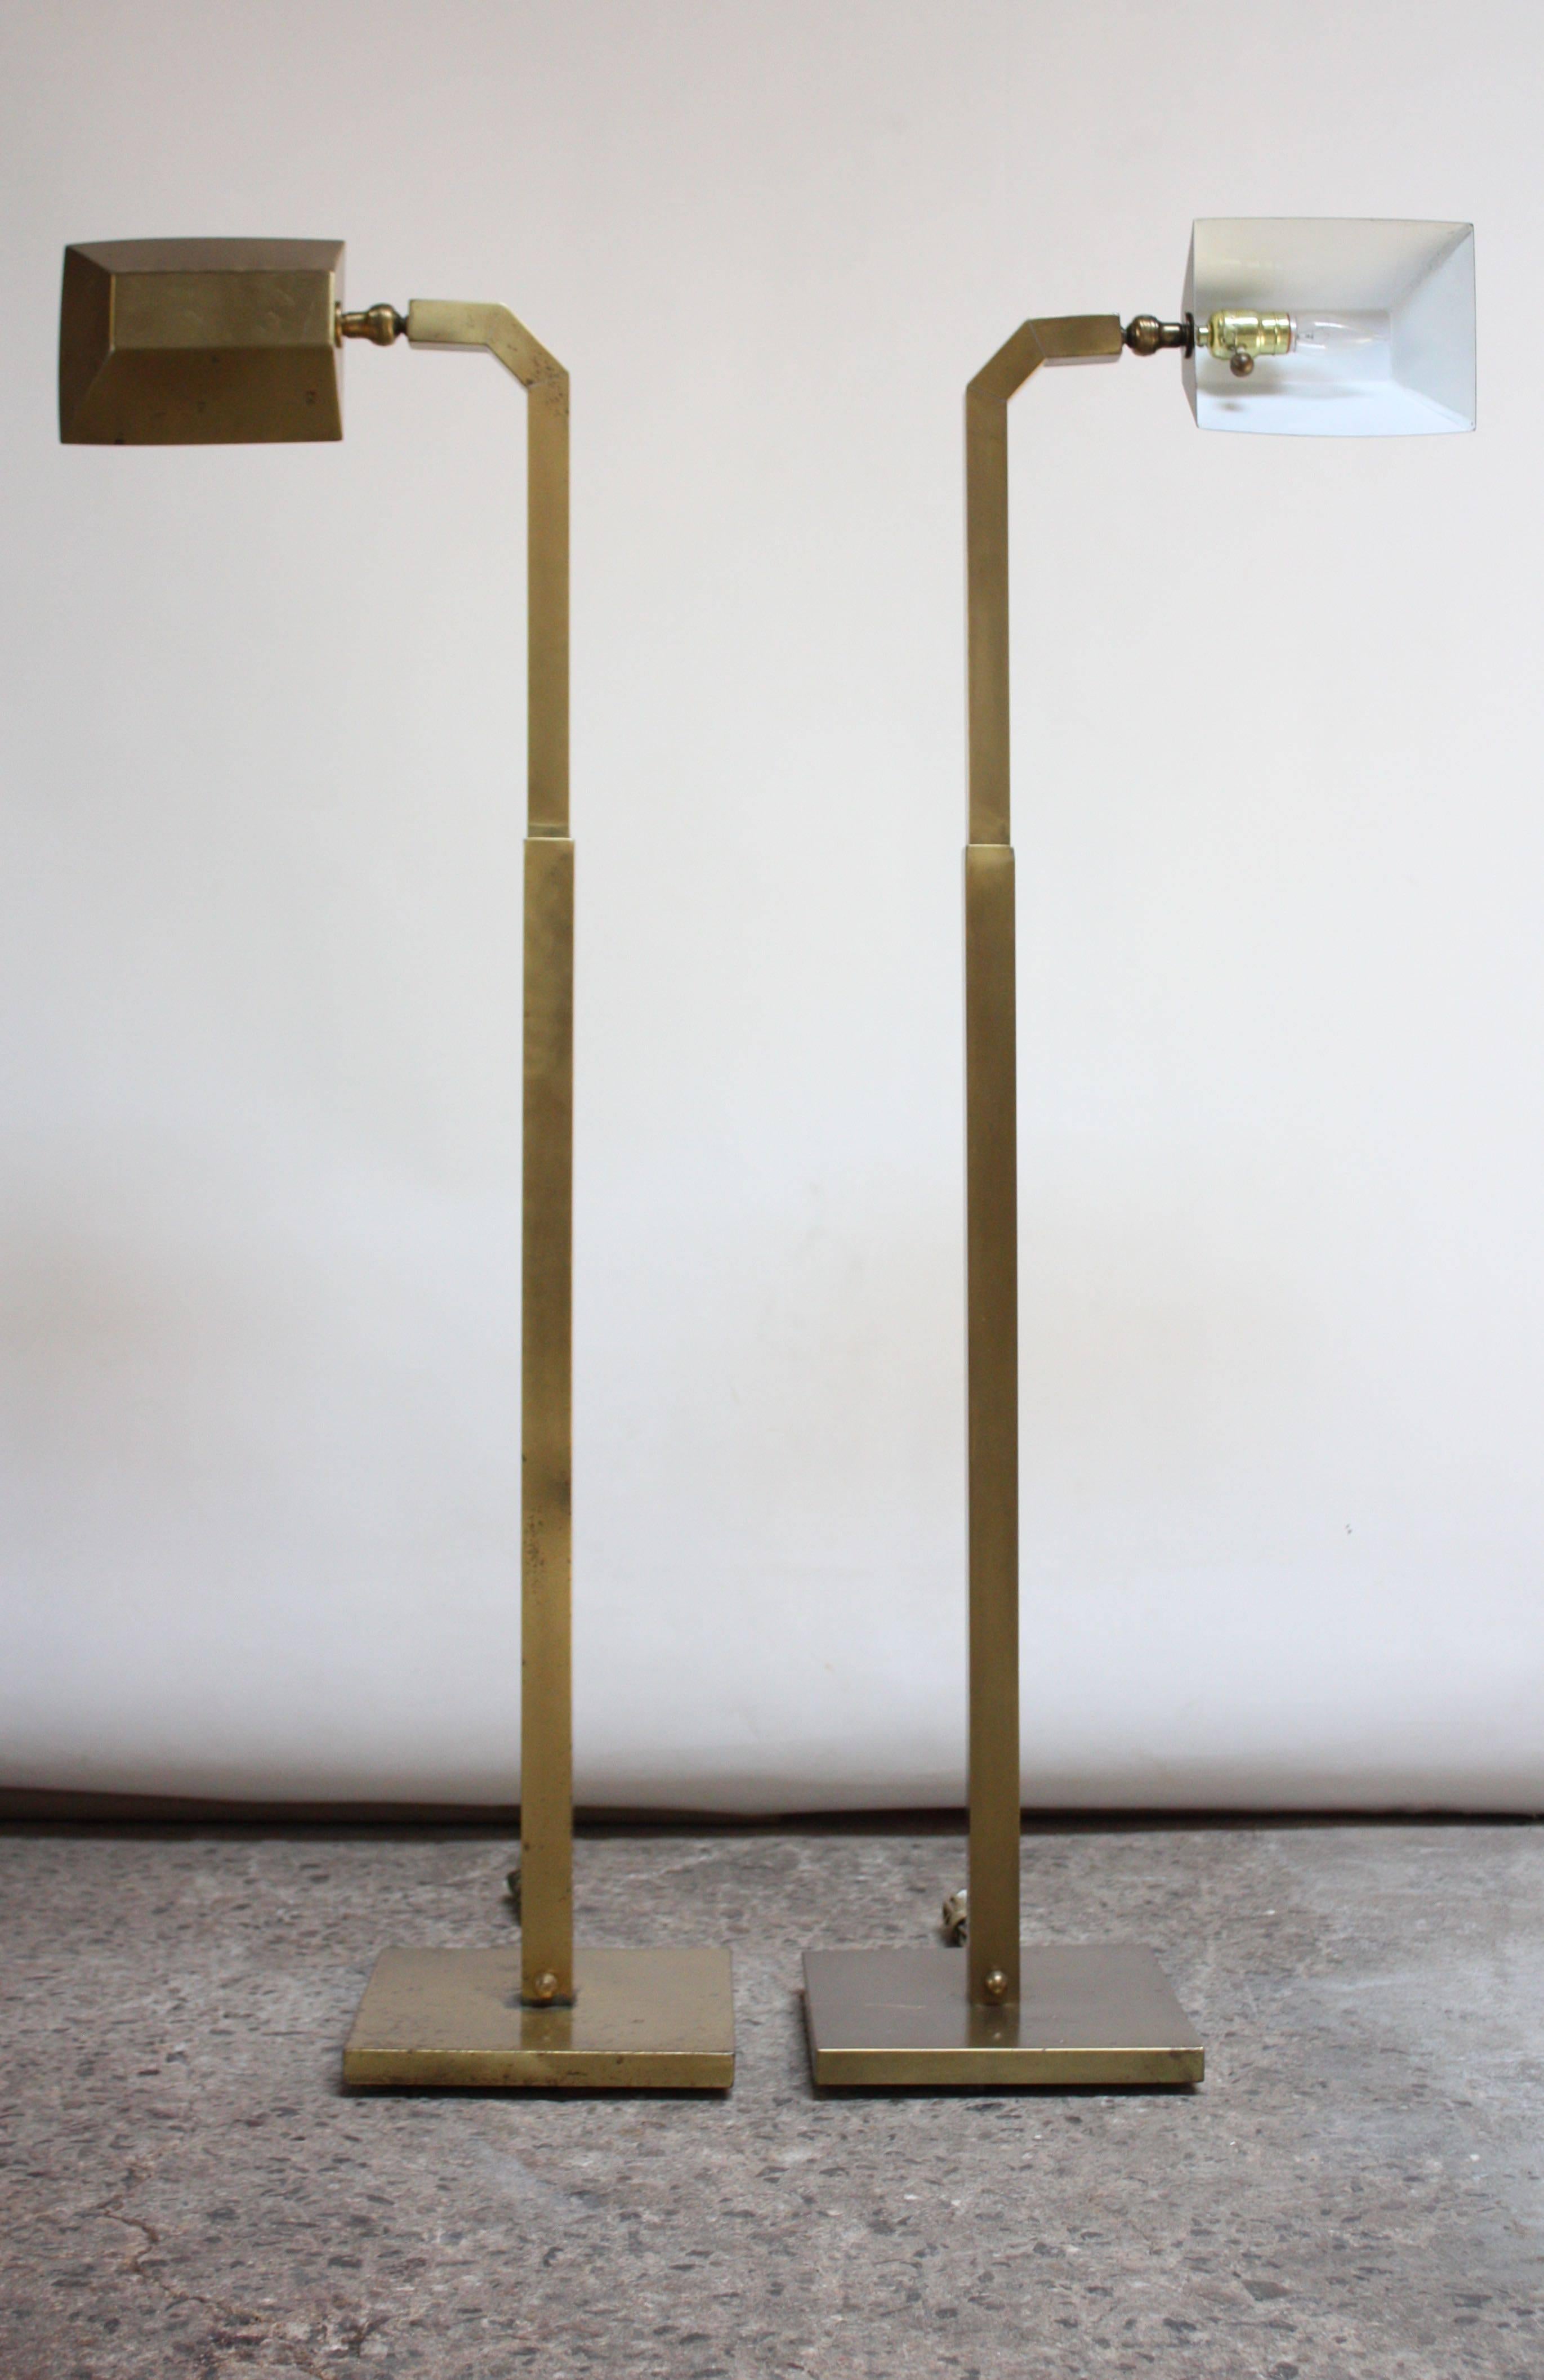 These floor lamps were designed by Chapman in the 1970s, combining Industrial and Modern Design. Composed entirely of brass, these lamps also feature the signature bronze finish and dimmer 'ball' knob with uniquely thick / wide shades. The shade is